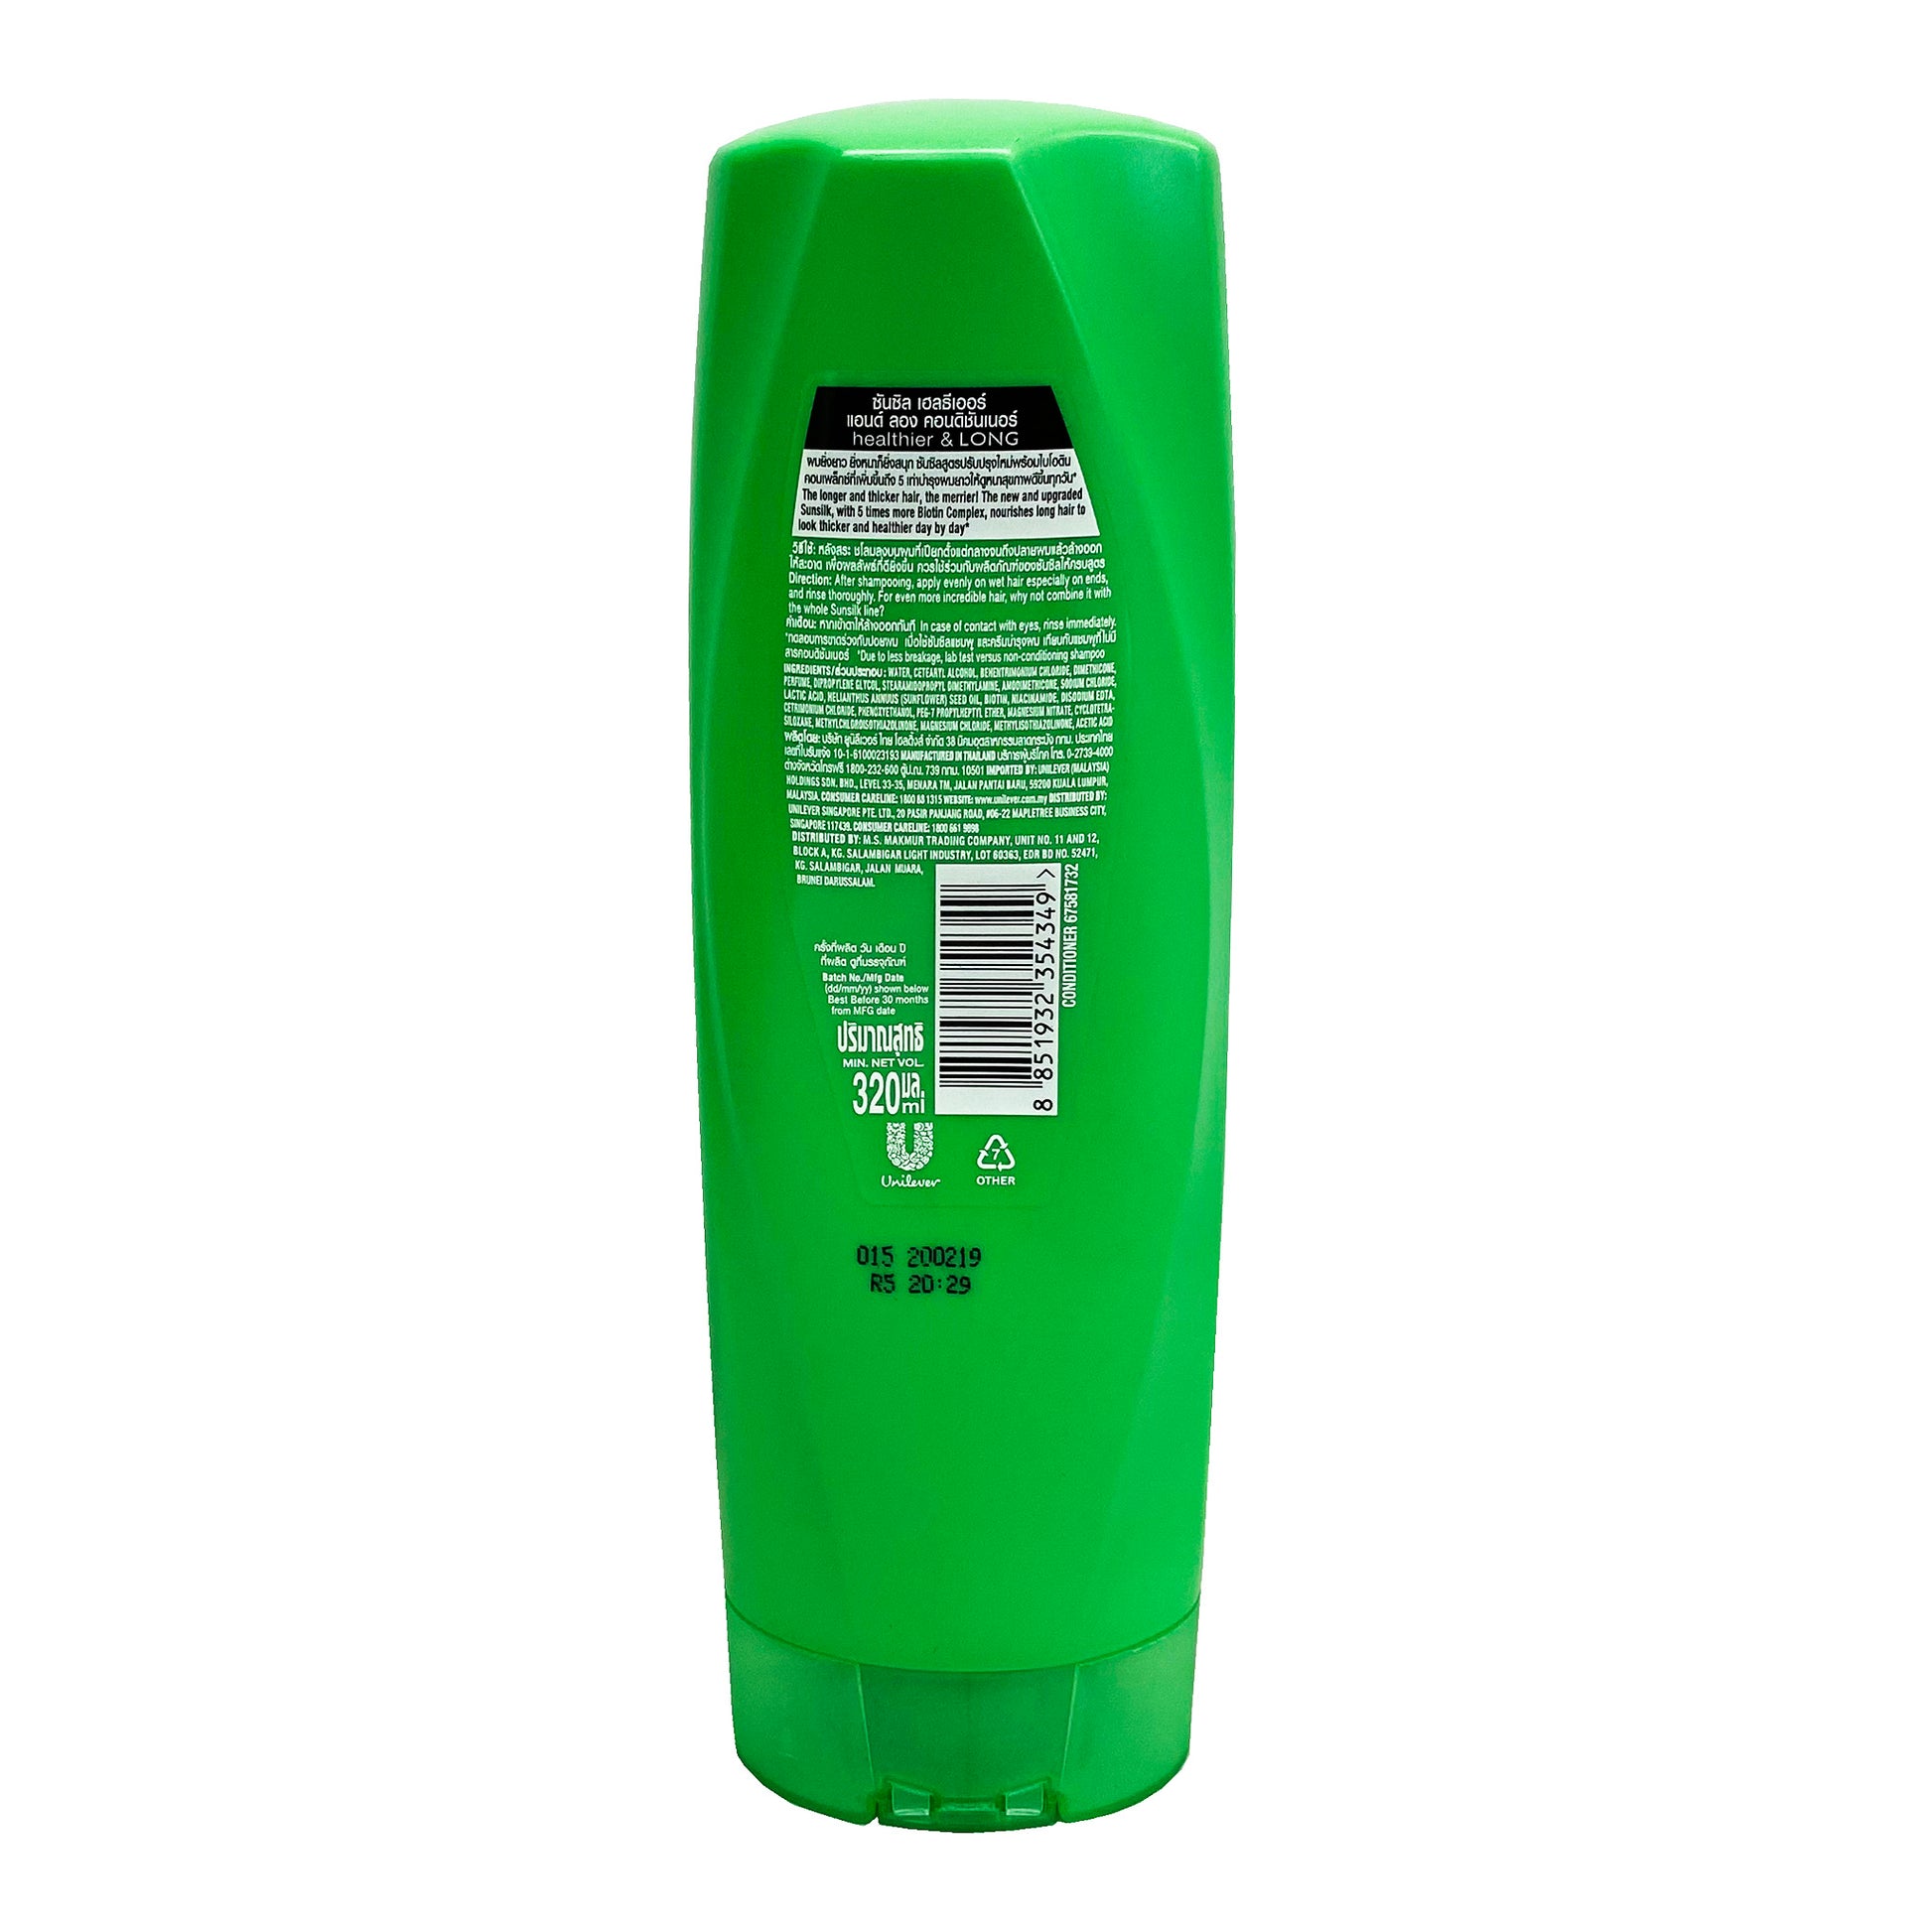 Back graphic view of Sunsilk Healthier and Long Conditioner Green 10.82oz (320ml)